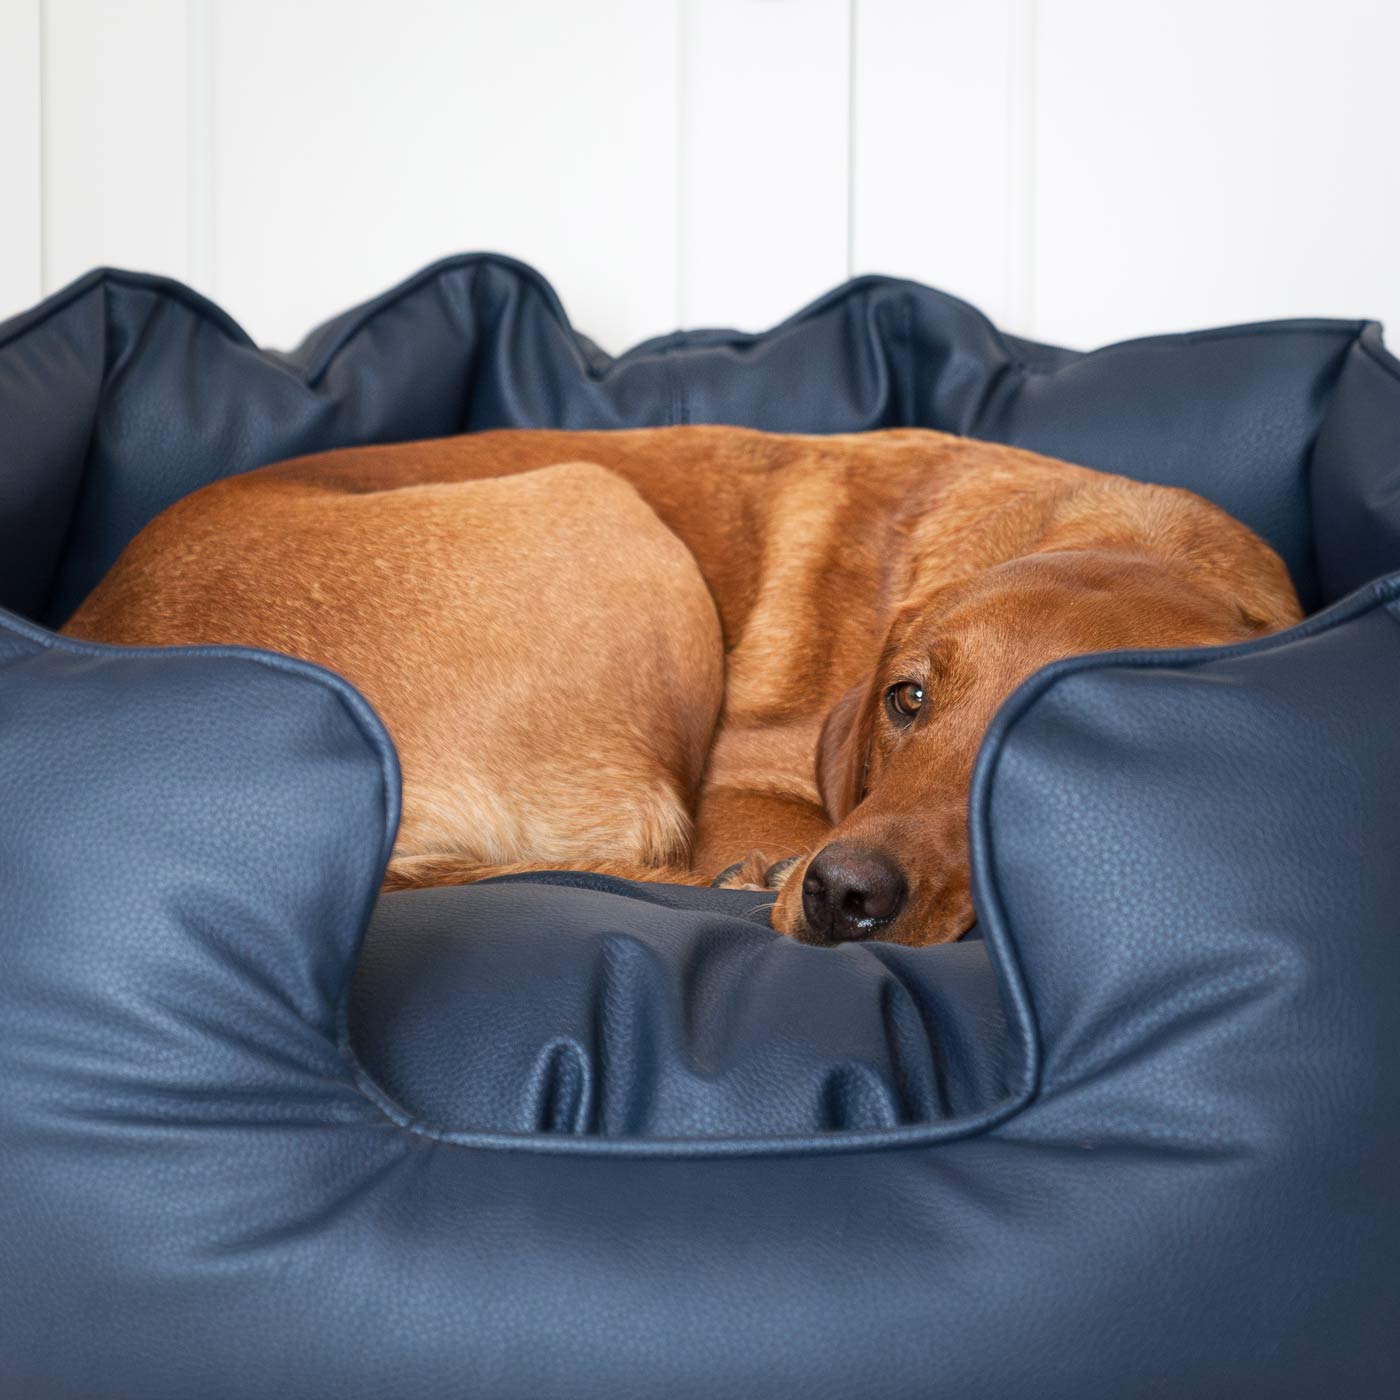 Luxury Handmade High Wall in Rhino Tough Jungle Faux Leather, in Pacific, Perfect For Your Pets Nap Time! Available To Personalize at Lords & Labradors US